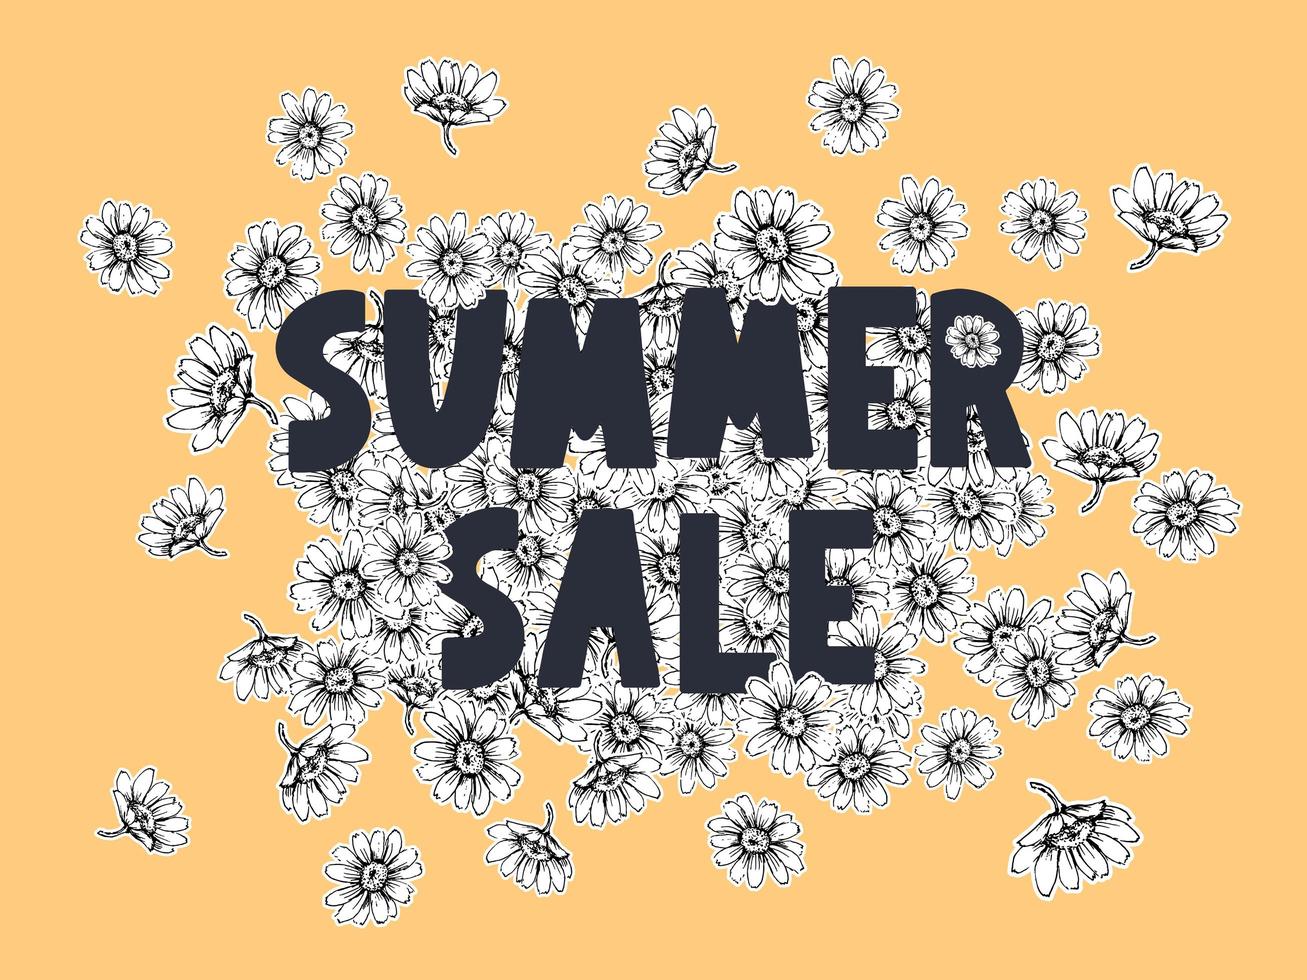 summer sale banner with flowers letter vector